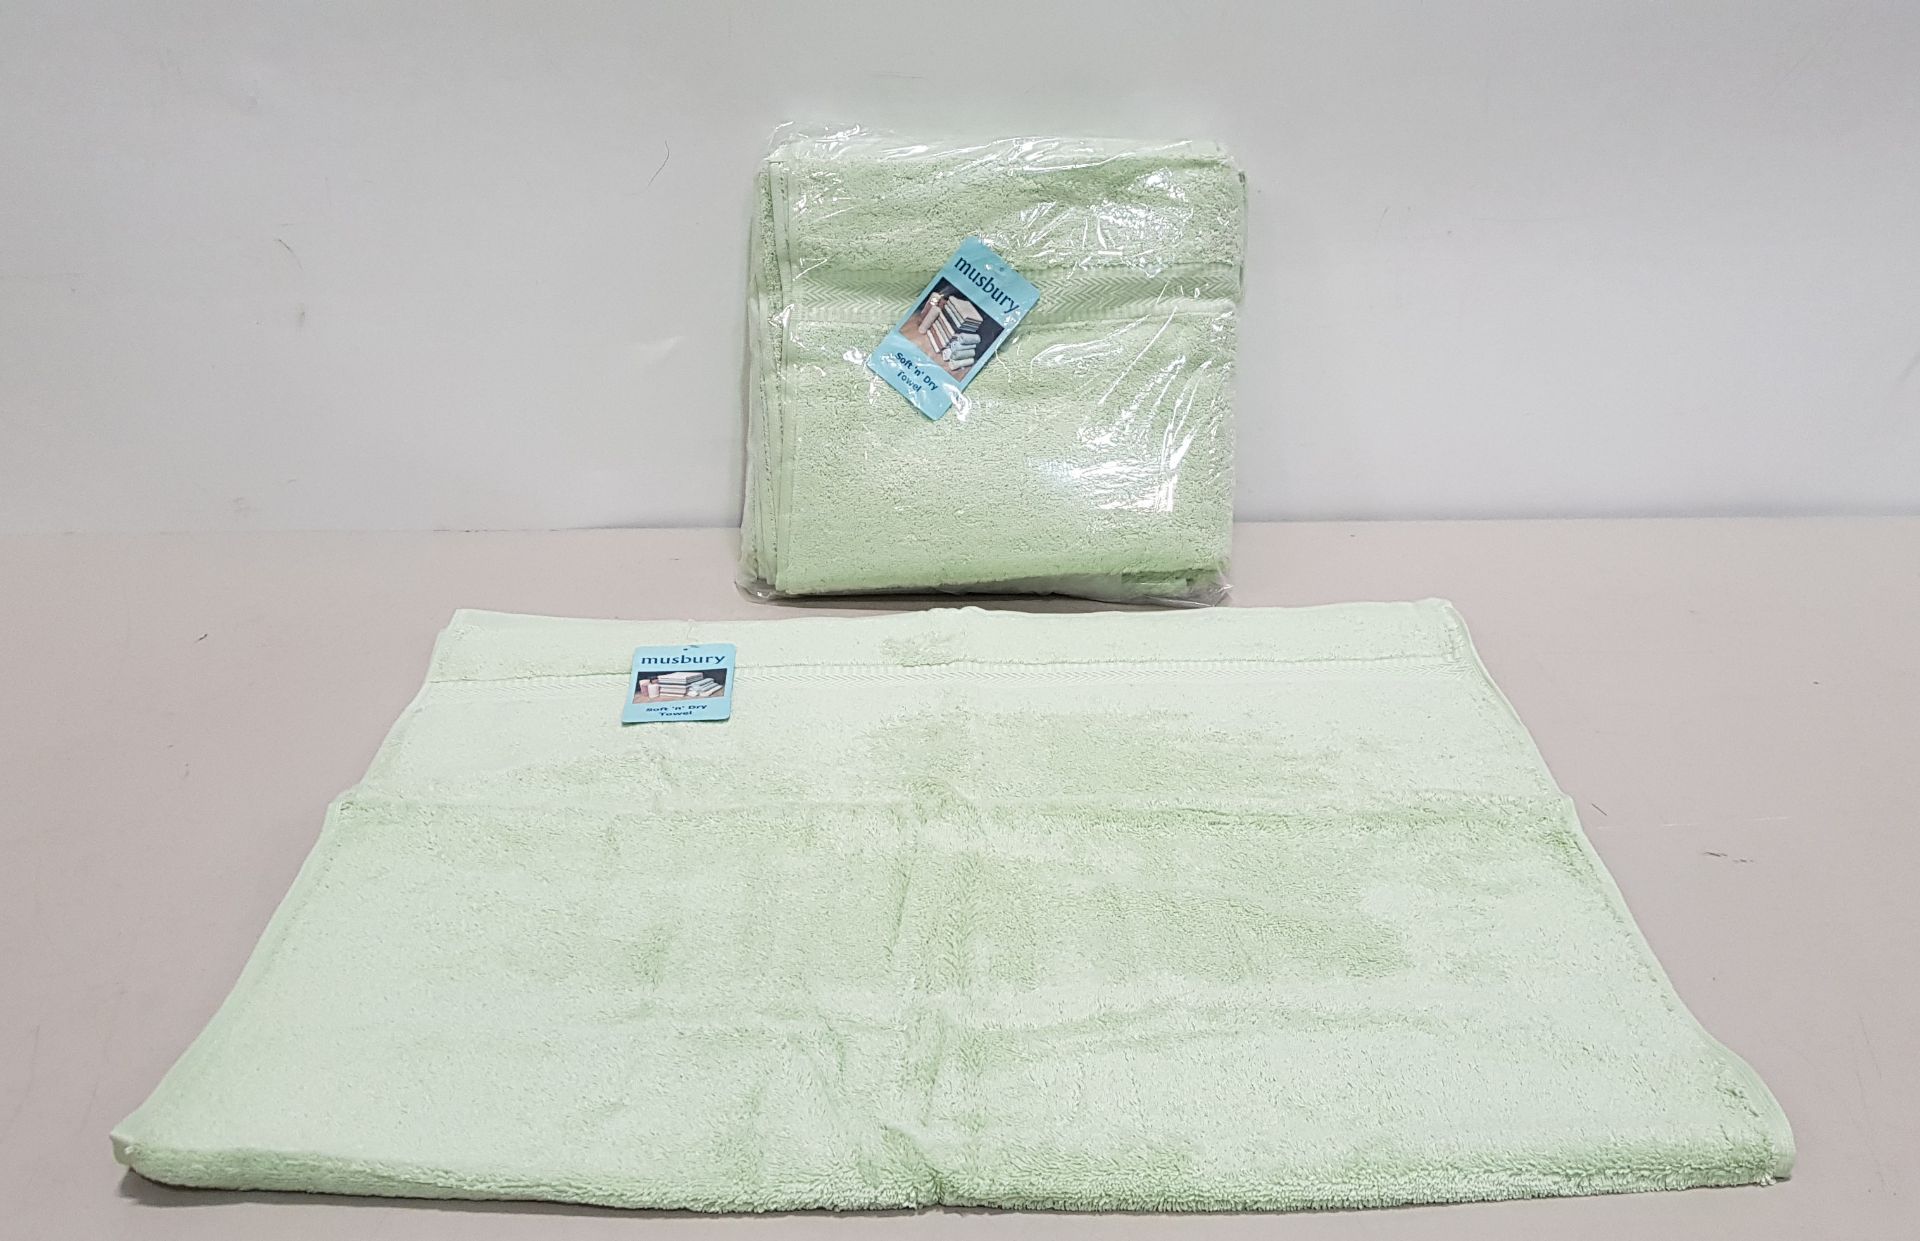 30 X BRAND NEW MUSBURY SUPERSOFT N DRY BATH TOWELS - ALL IN GREEN COLOUR ( SIZE : 70 X 127 CM ) - IN